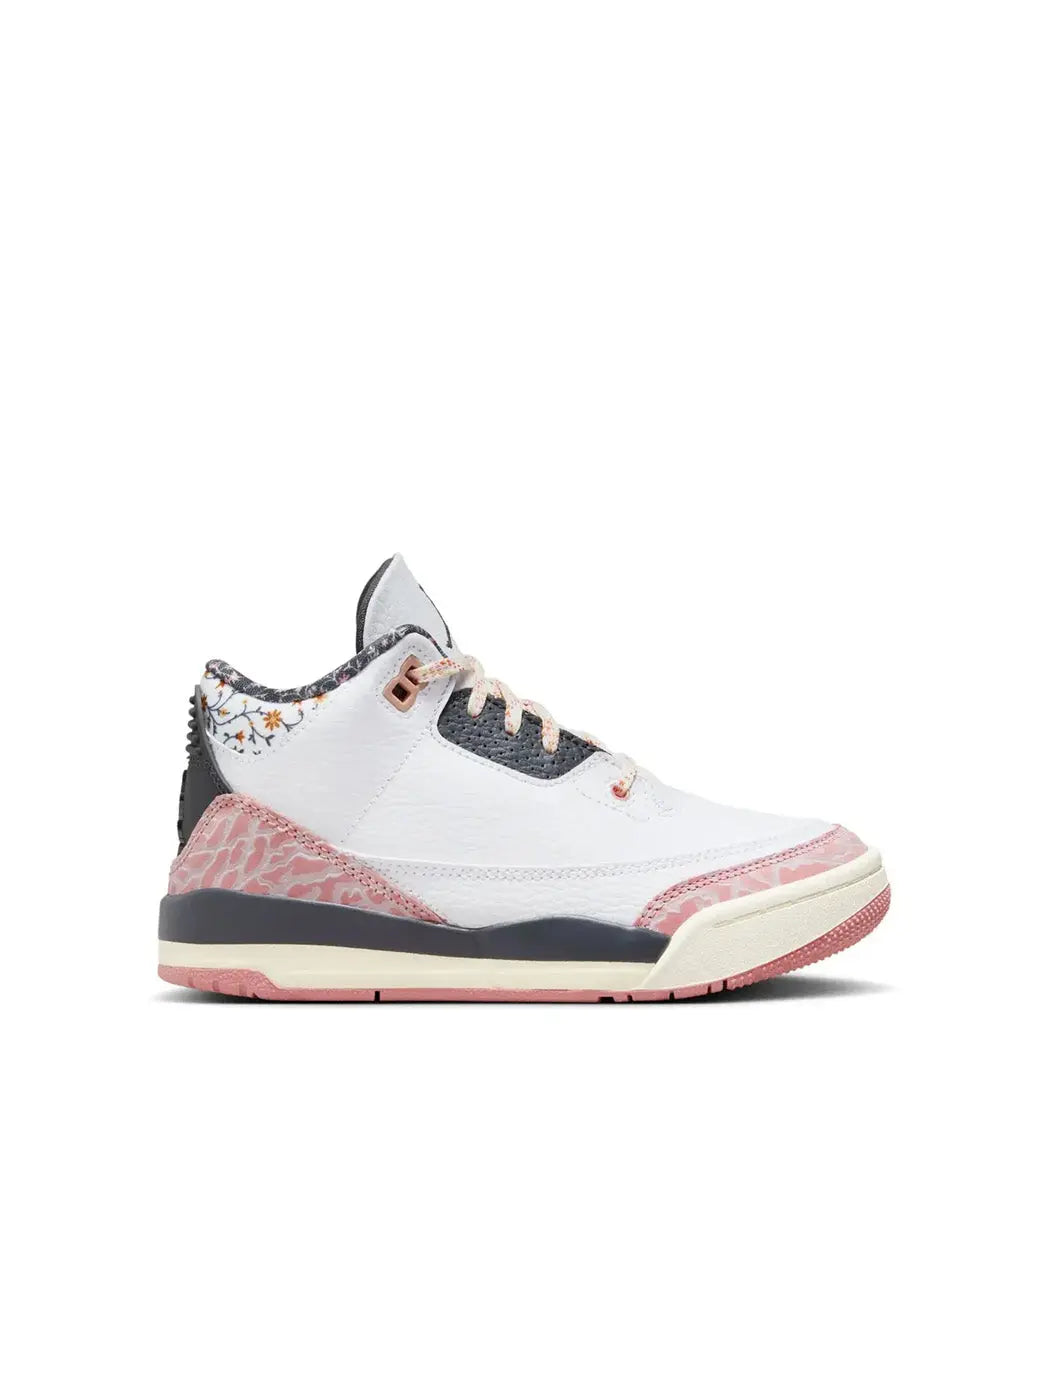 Nike Air Jordan 3 Retro Red Stardust (PS) in Auckland, New Zealand - Shop name